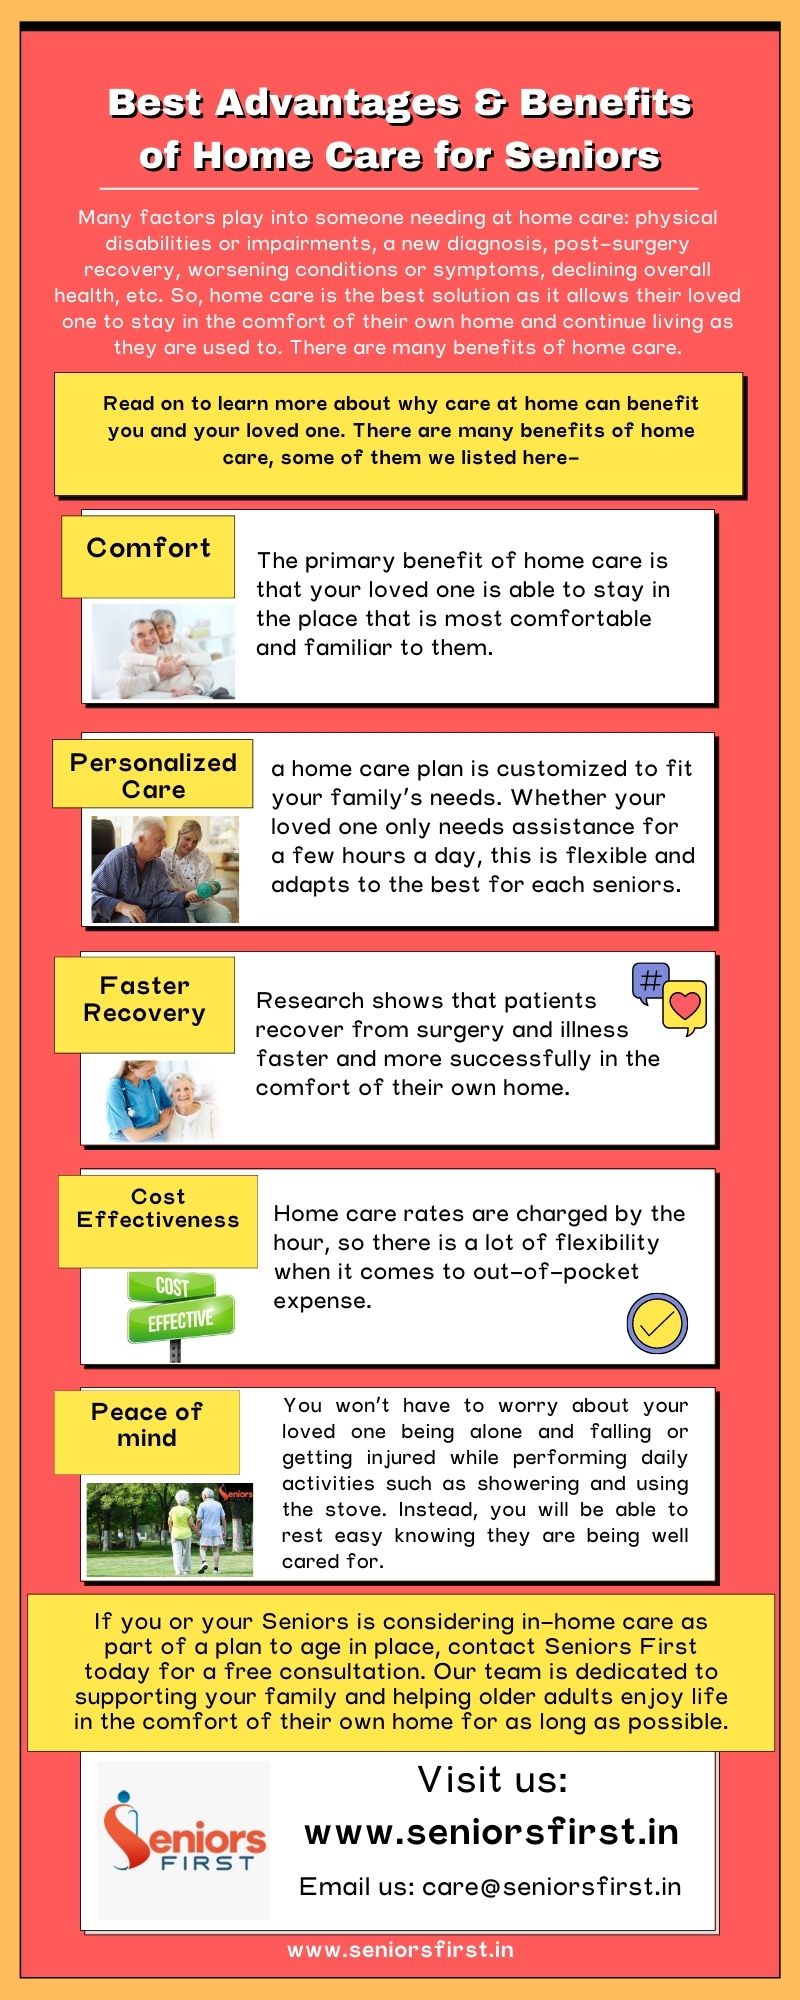 Best Advantages & Benefits of Home Care for Seniors.jpg  by SeniorsFirst